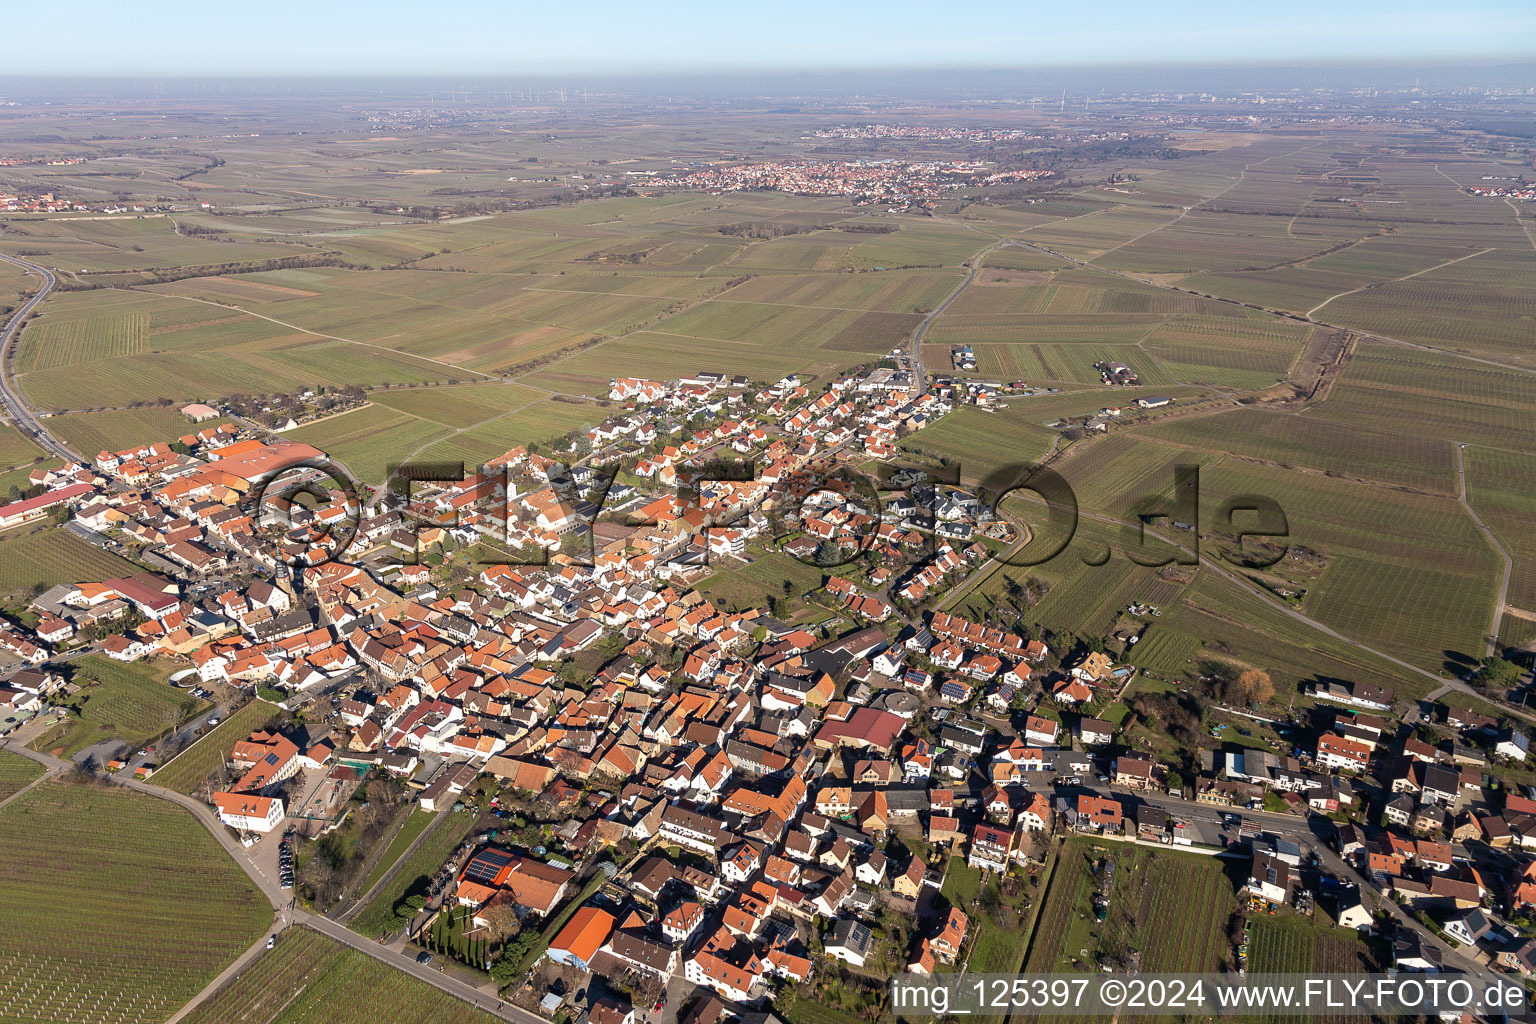 Aerial view of City view from the downtown area with the outskirts with adjacent agricultural fields in Kallstadt in the state Rhineland-Palatinate, Germany